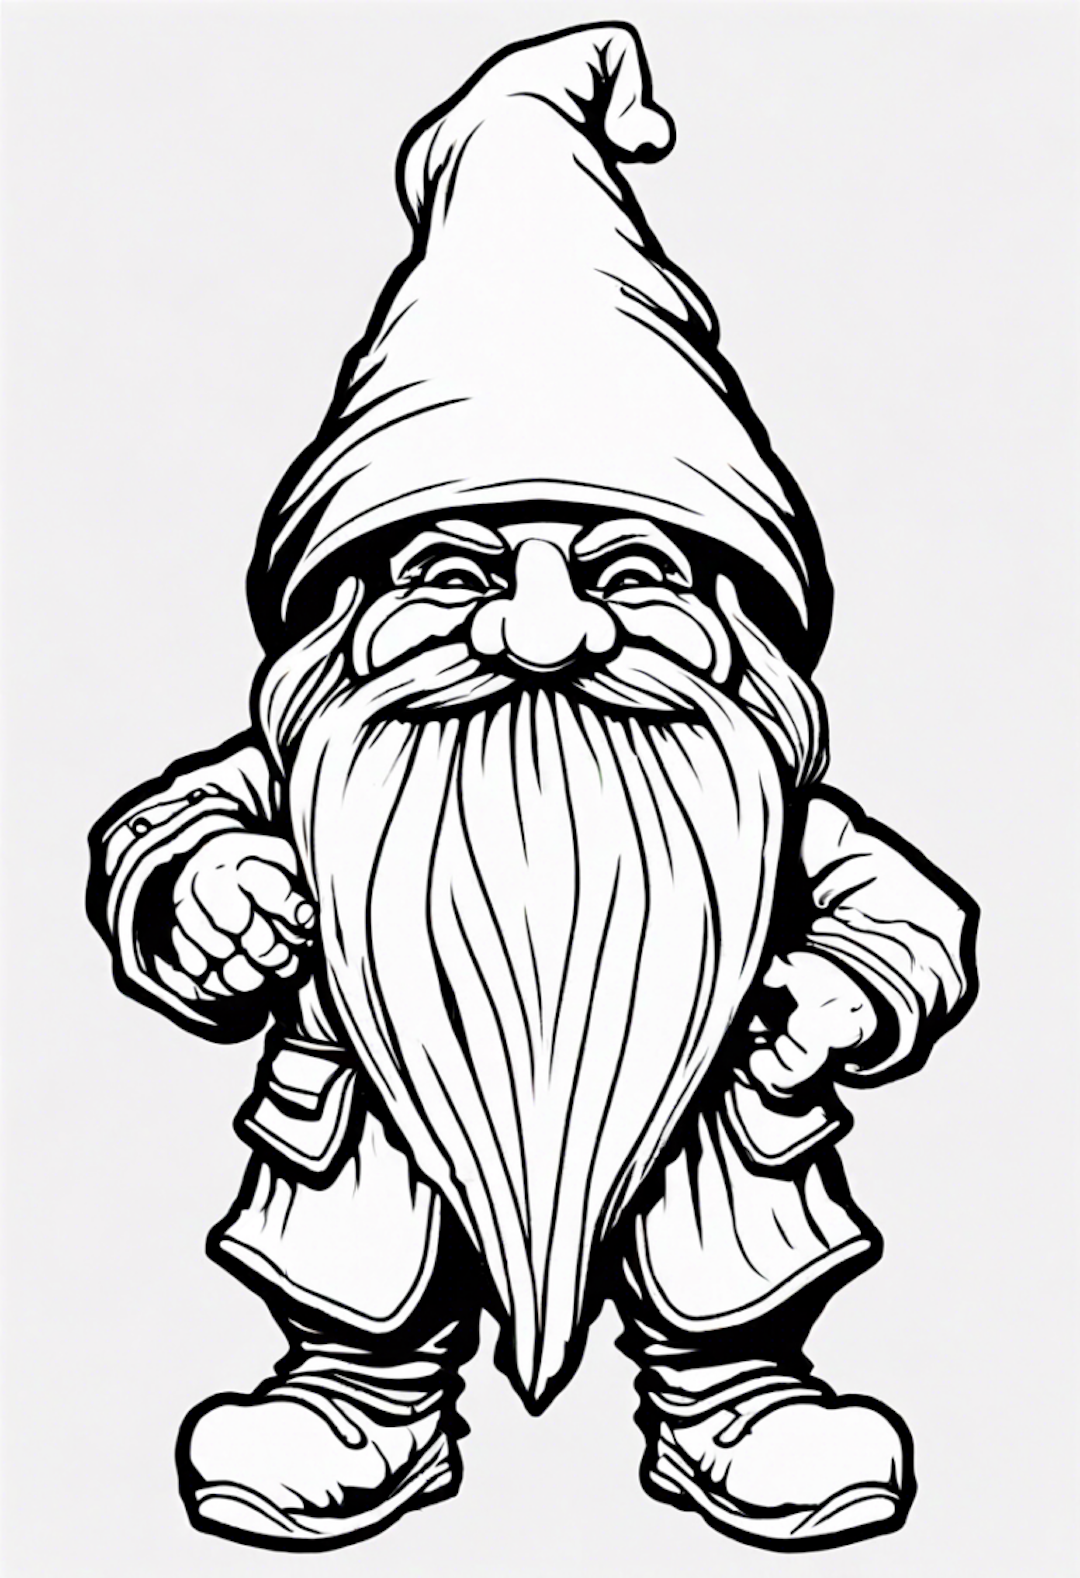 Gnome Adventure Coloring Page coloring pages